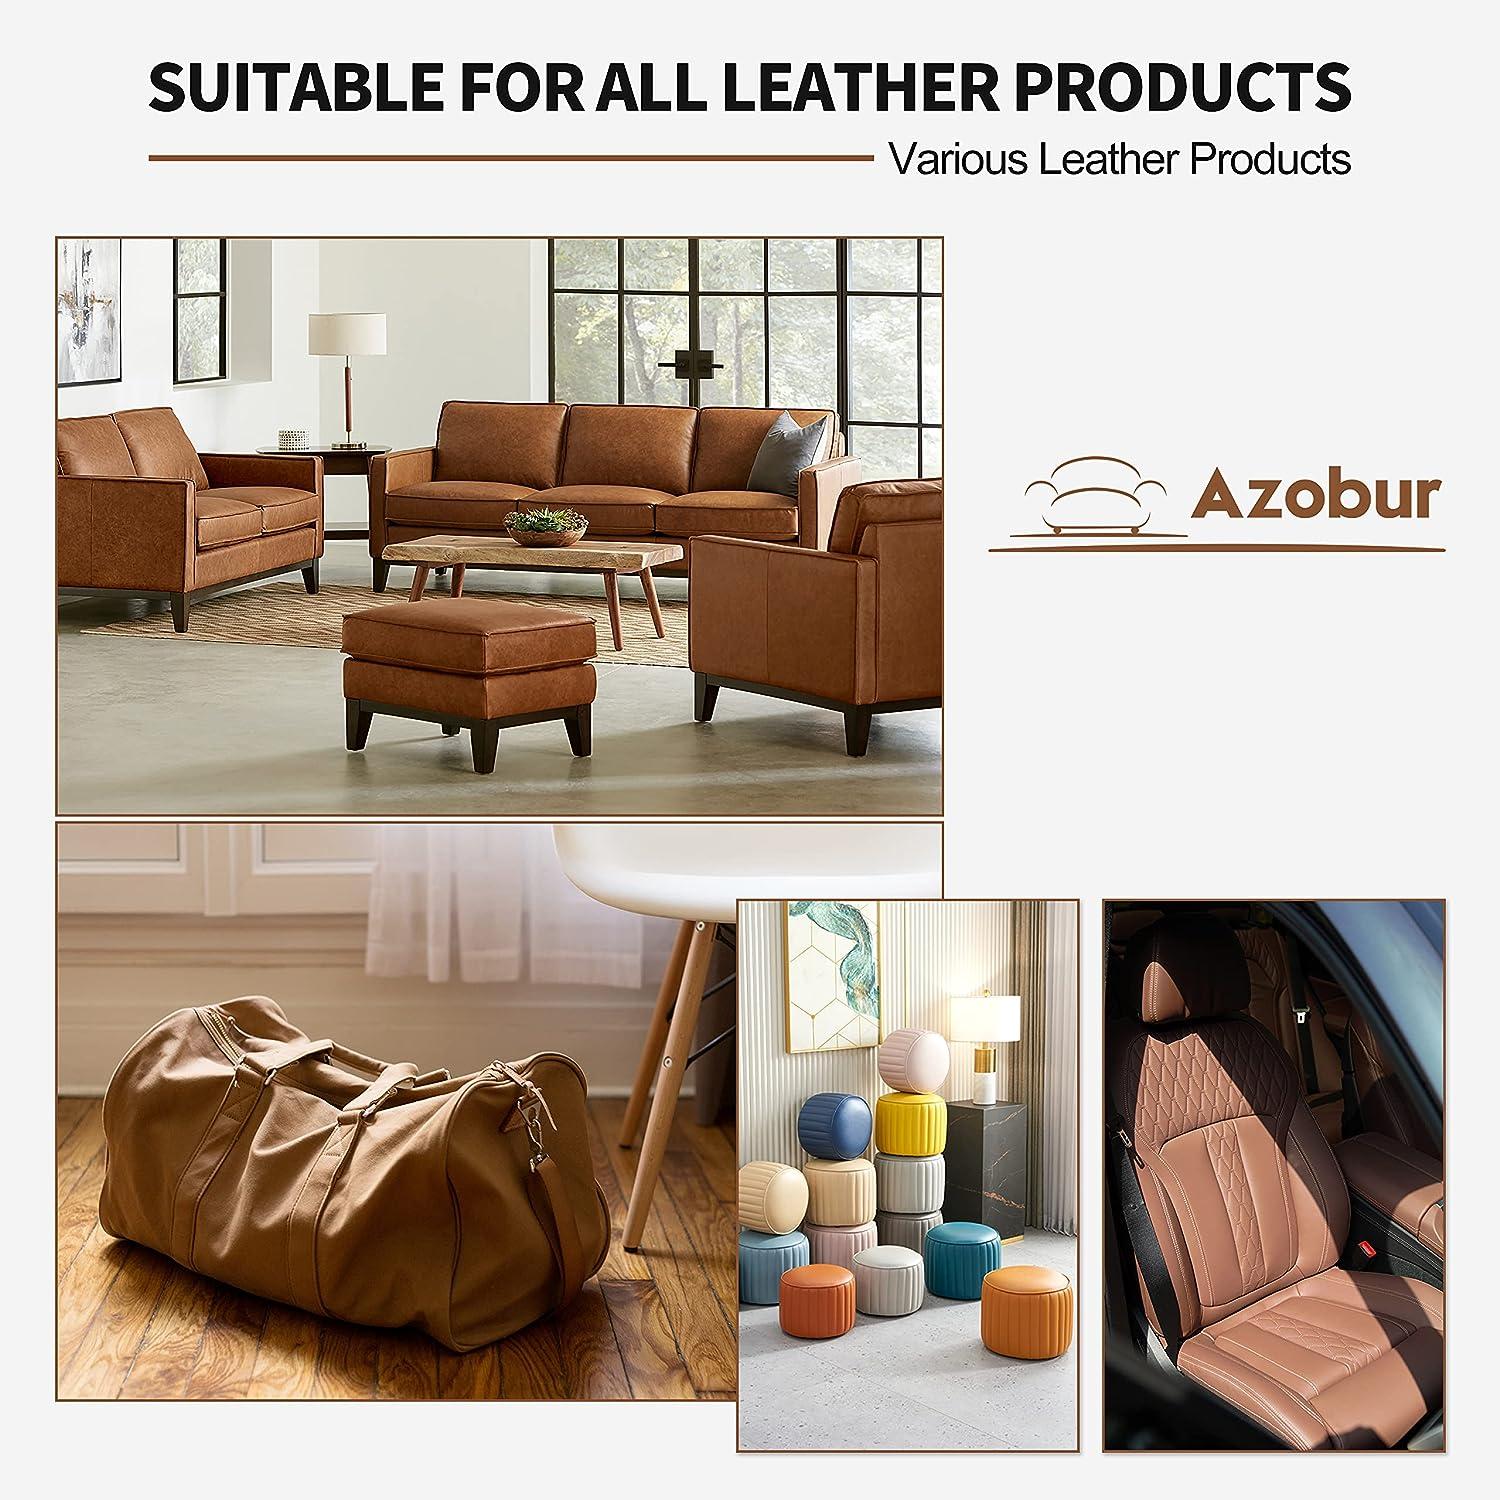 Azobur Leather Repair Tape Patch Leather Adhesive for Sofas Car